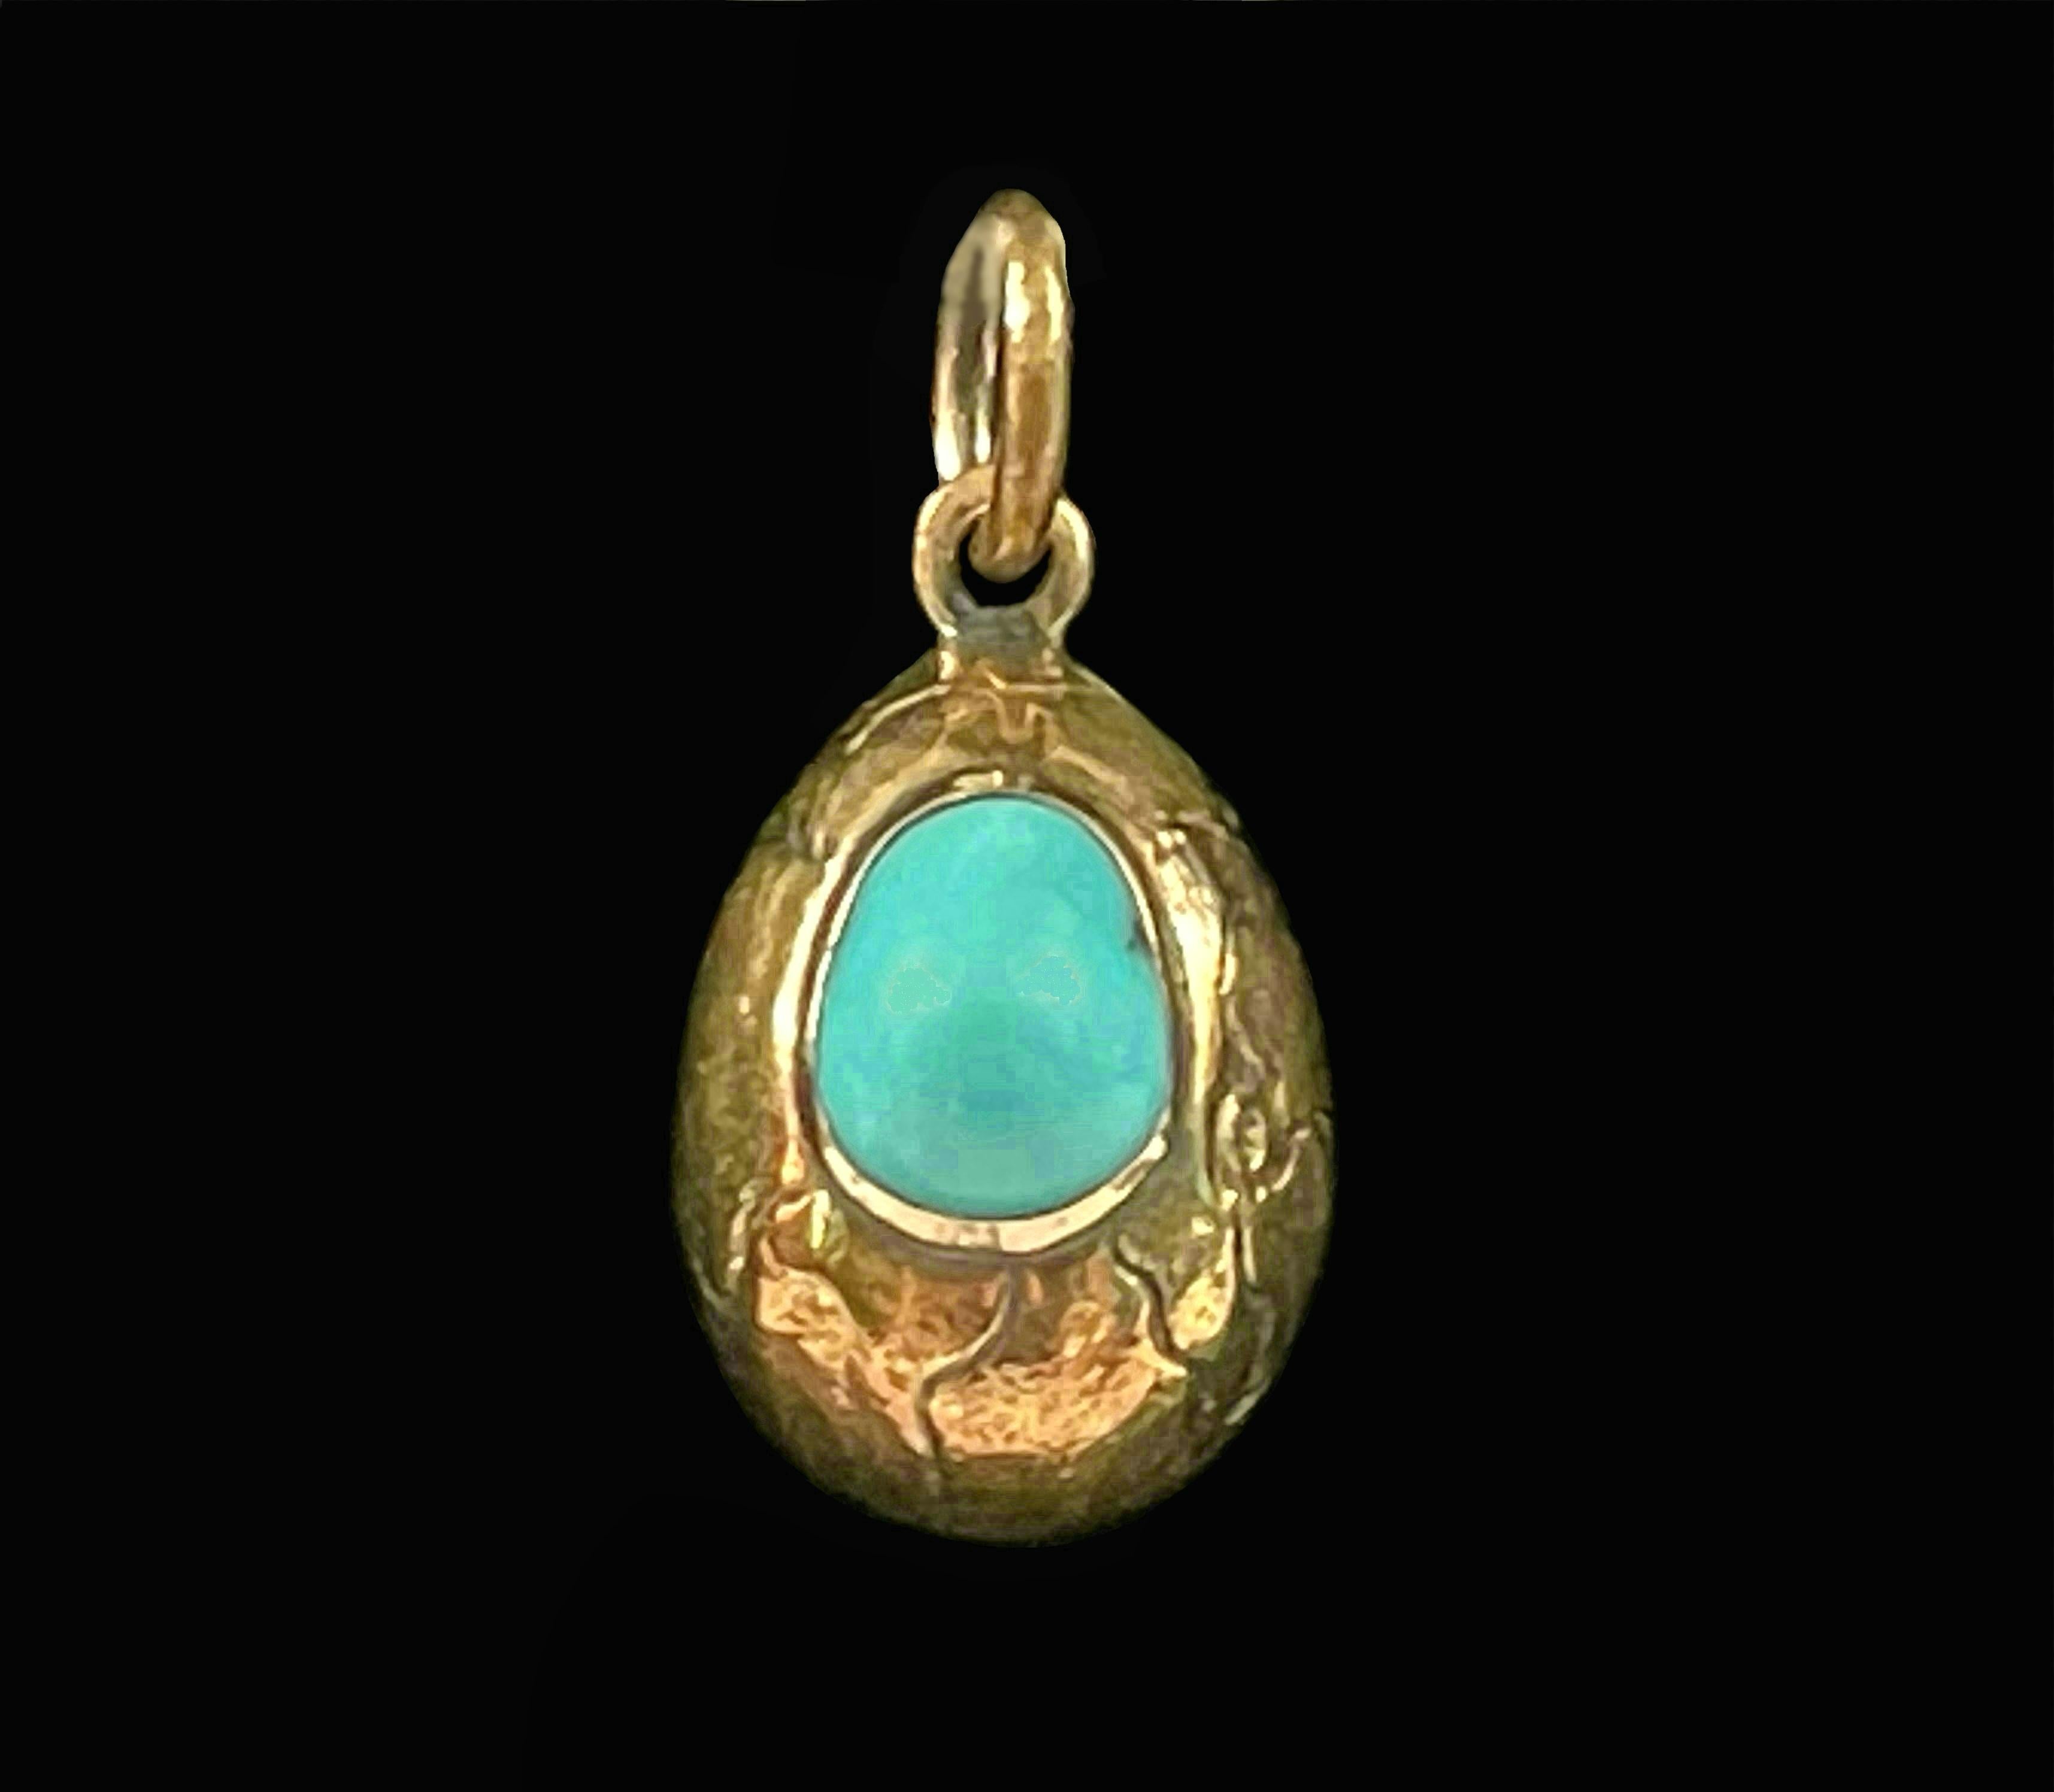 Romantic Antique 14K Yellow Gold & Persian Turquoise Egg Pendant - Early 20th Century For Sale